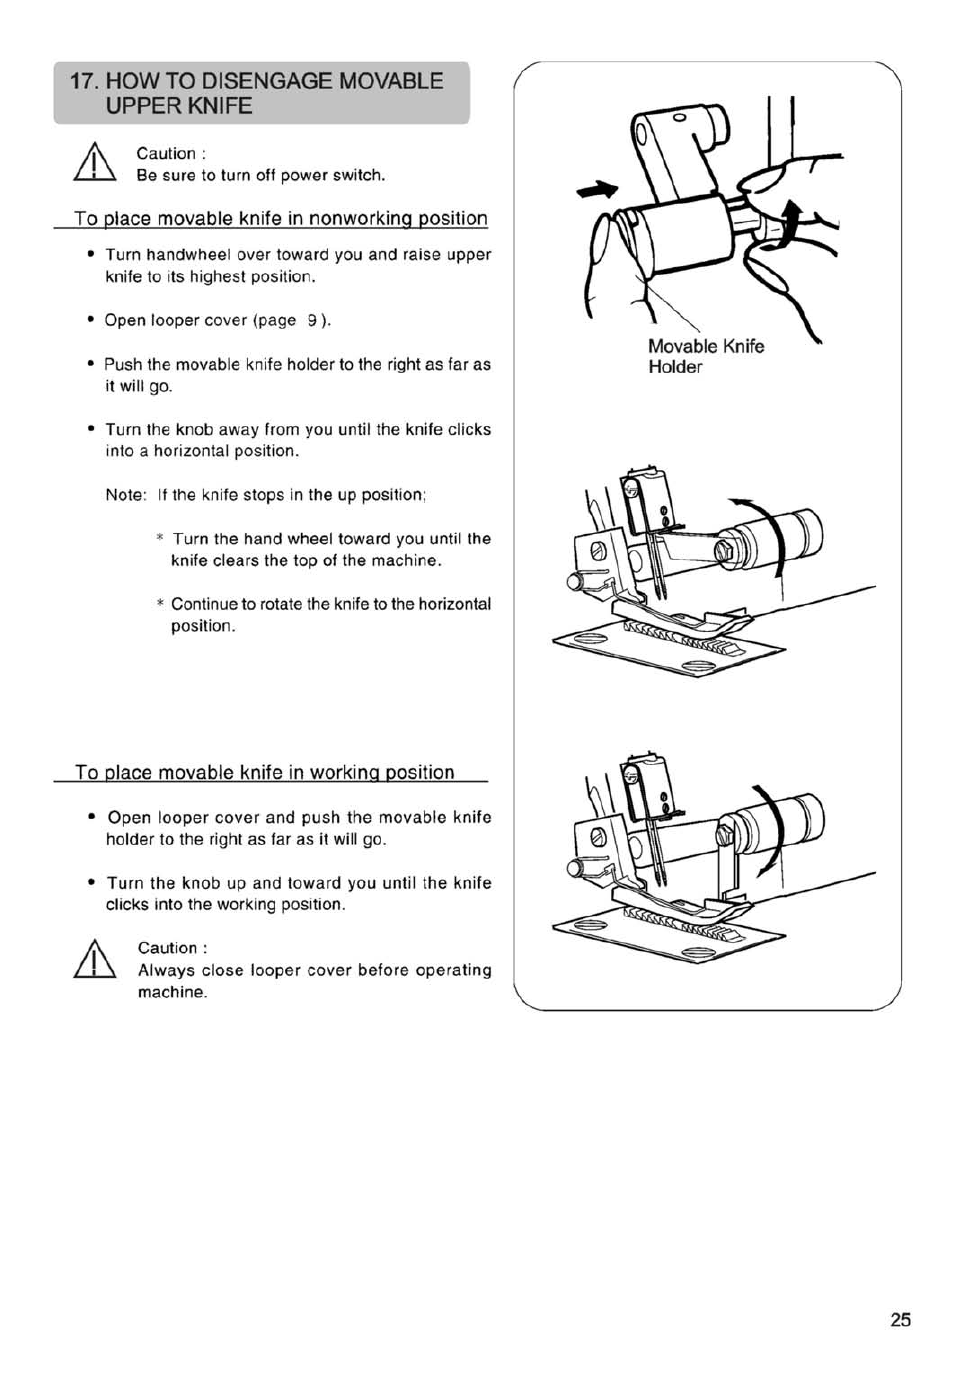 Howto disengage movable upper knife, How to disengage movable upper knife | SINGER 14SH754/14CG754 User Manual | Page 26 / 53